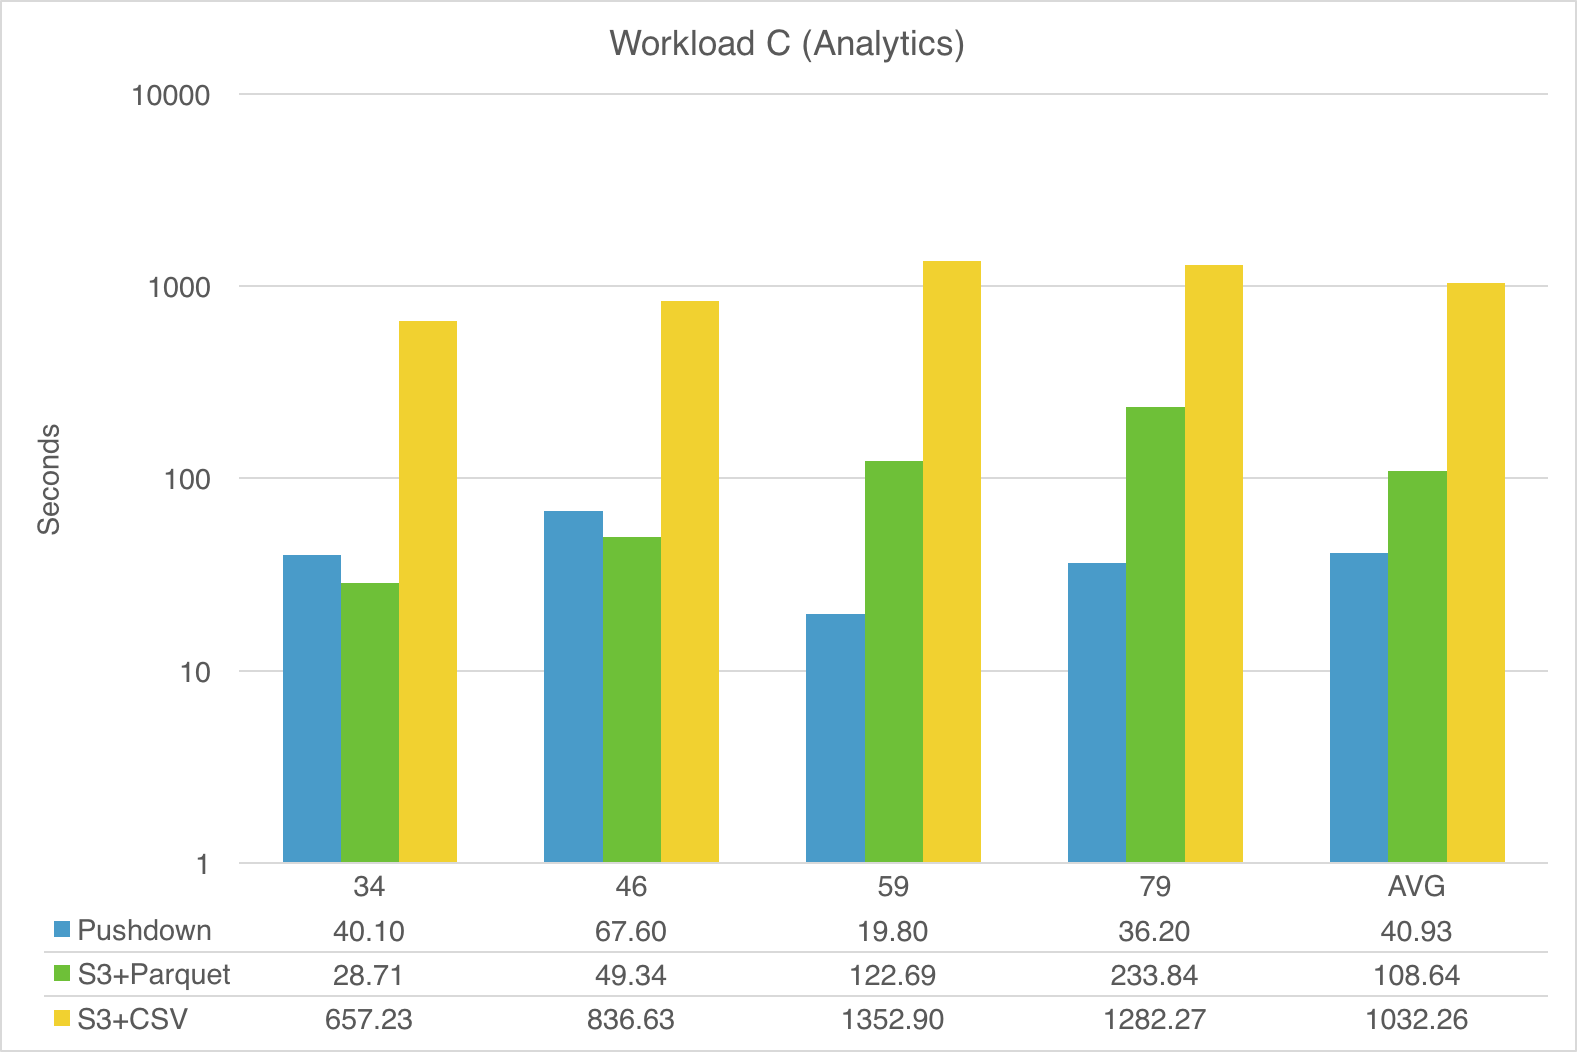 Performance comparison between queries in Workload C with pushdown vs no pushdown